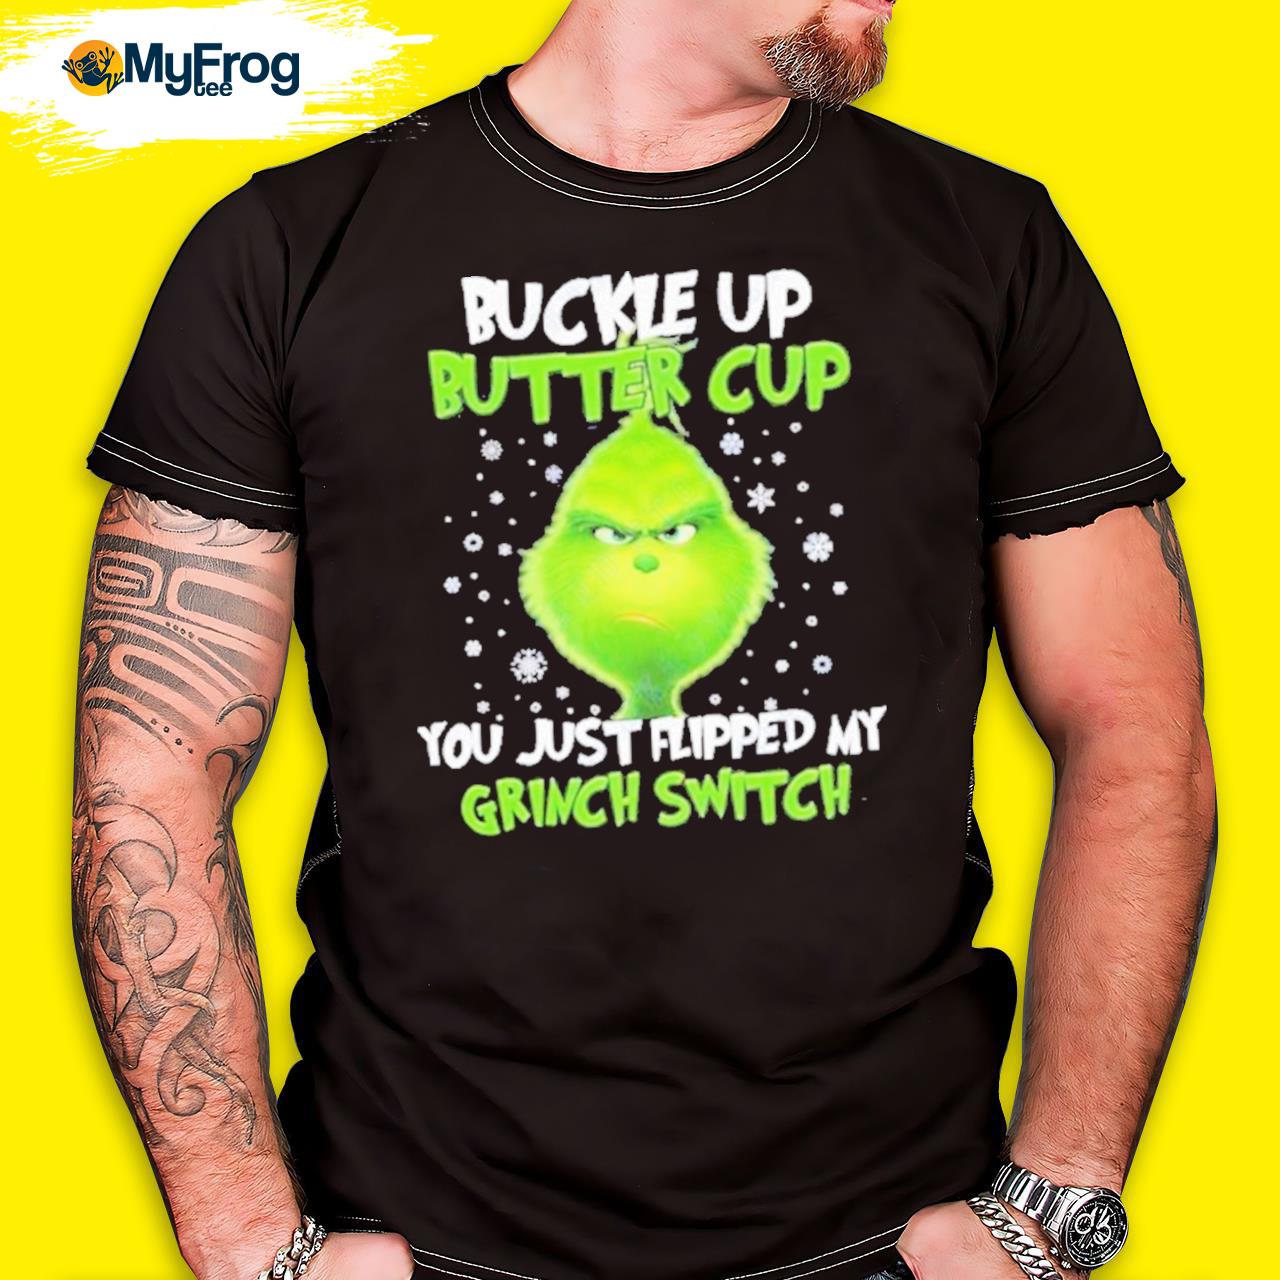 https://images.myfrogtees.com/2022/12/grinch-buckle-up-buttercup-you-just-flipped-my-grinch-switch-ugly-christmas-sweater-shirt.jpg